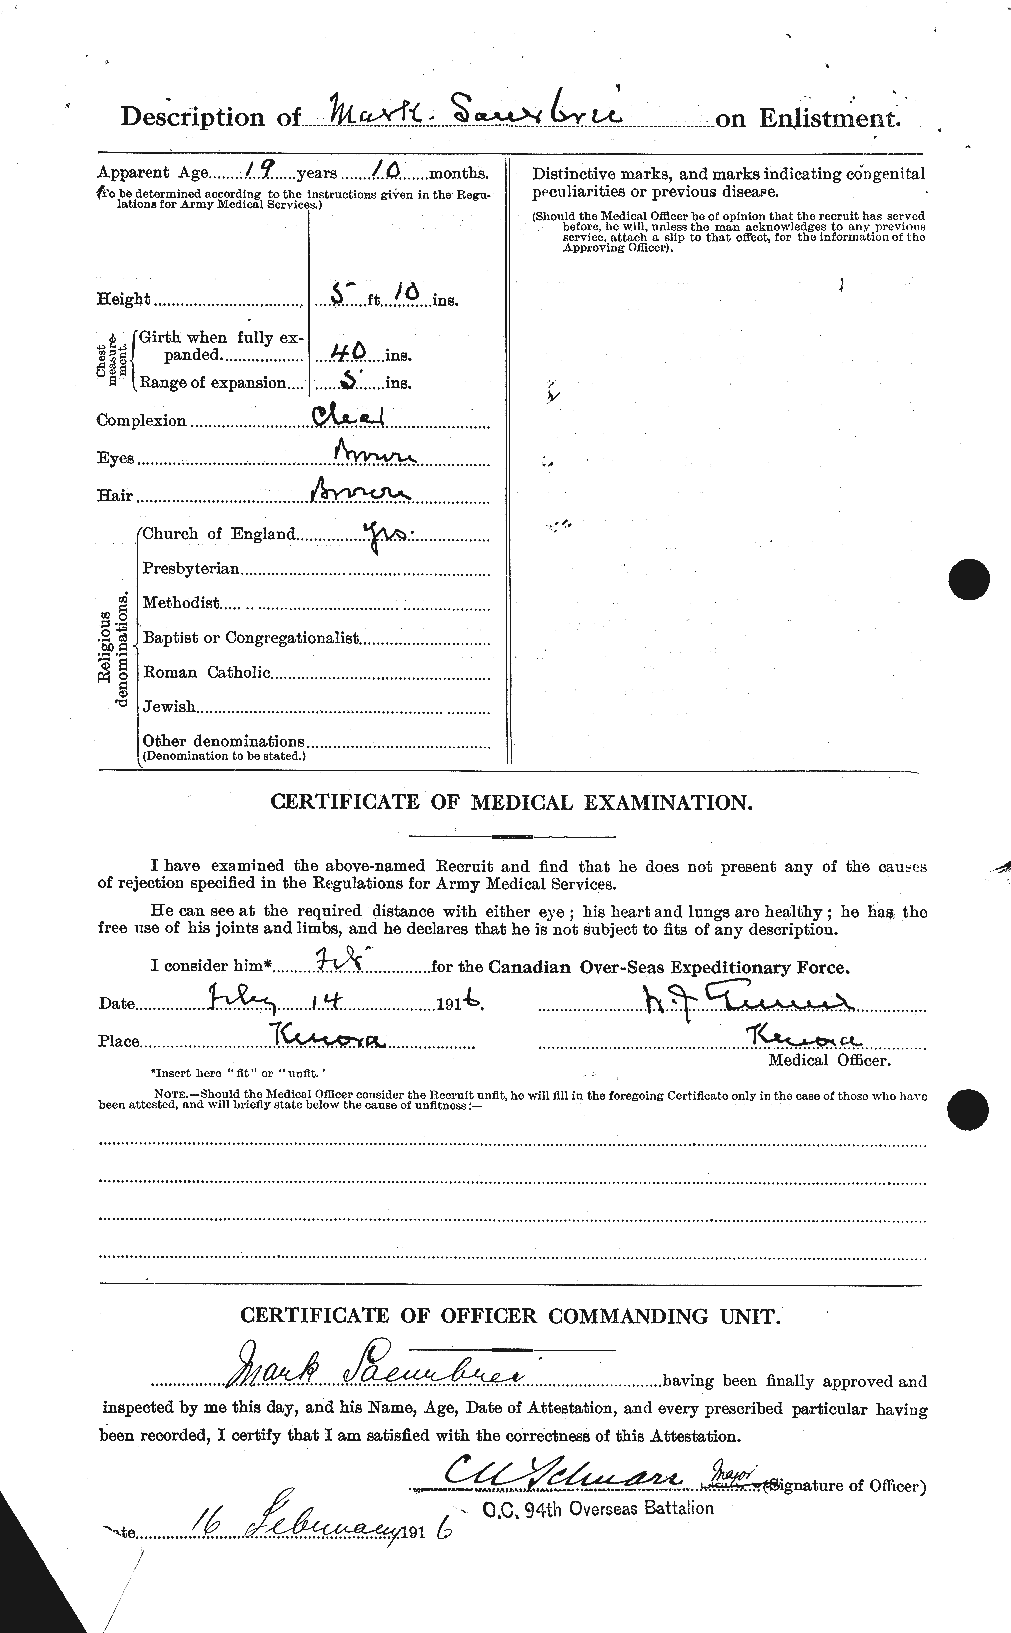 Personnel Records of the First World War - CEF 082943b